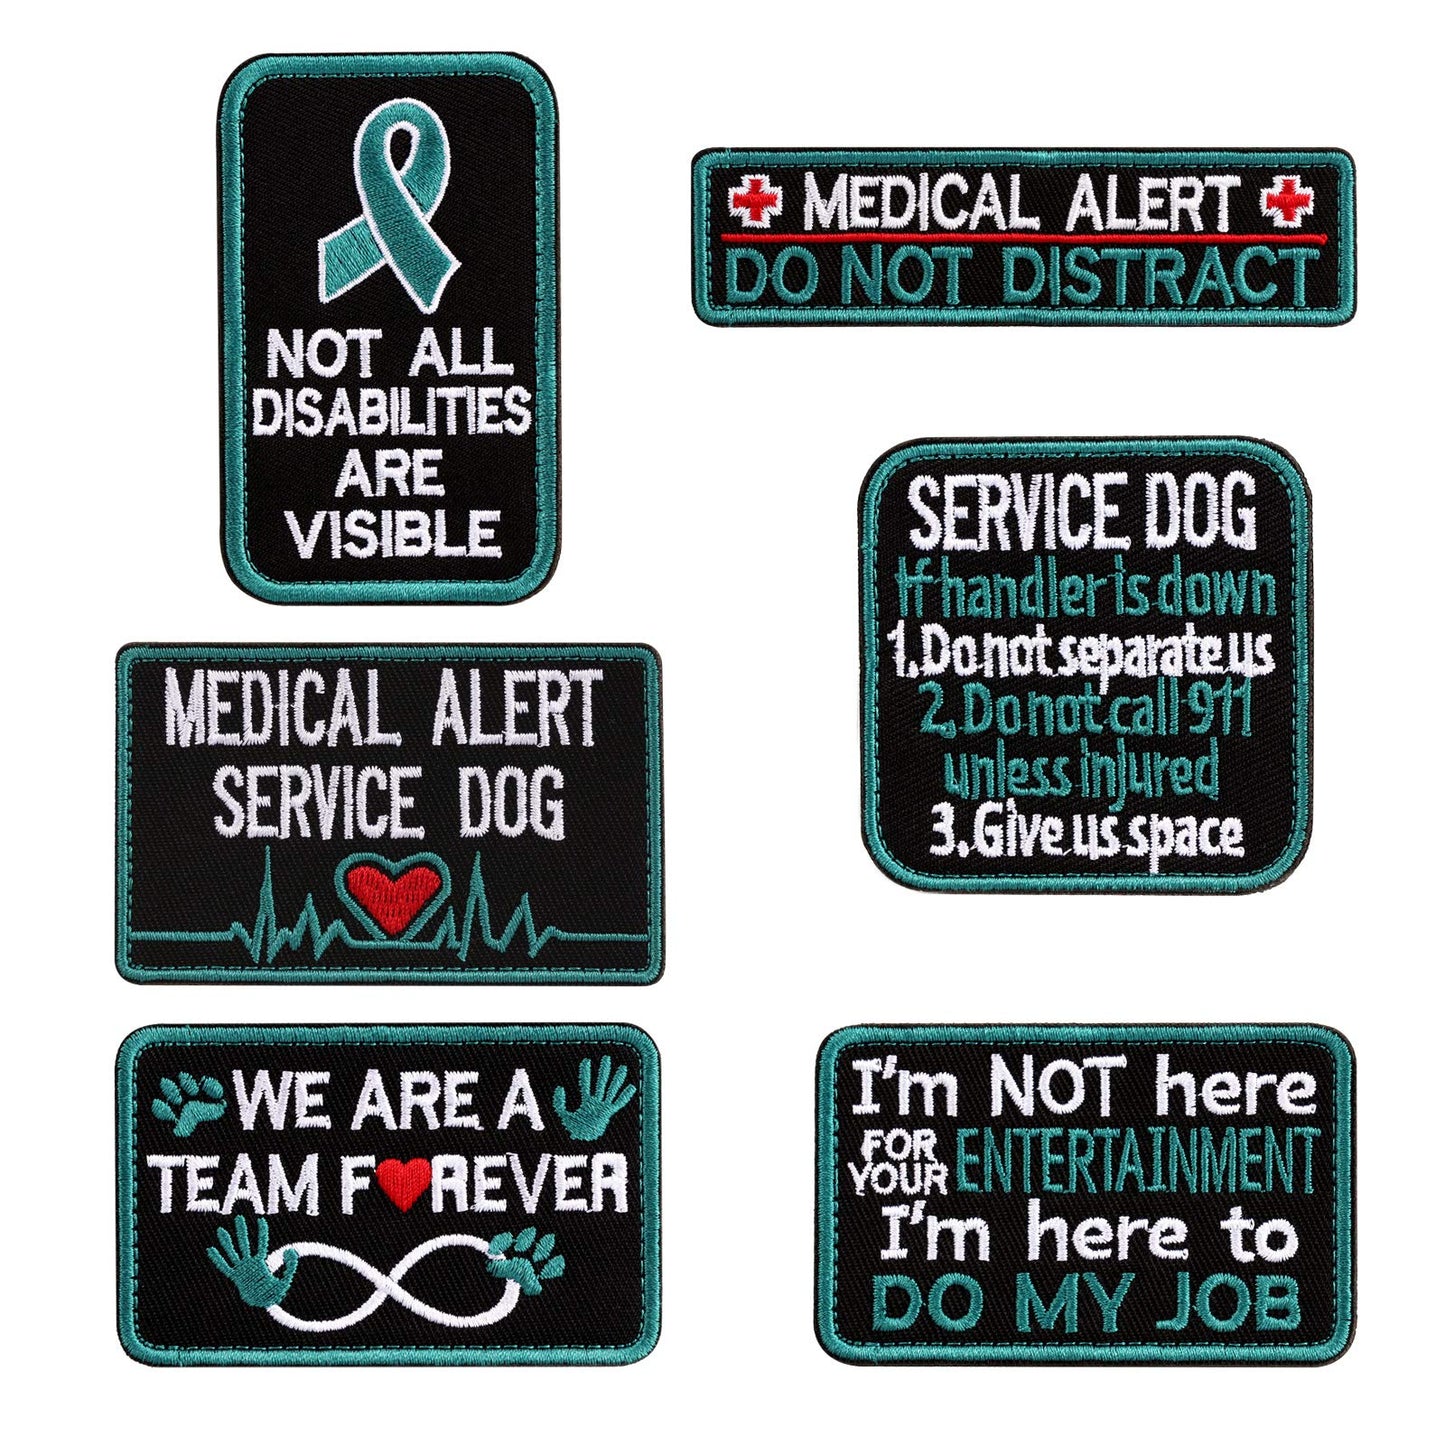 Vevins Service Dog Vest Patches - K9 in Training Hook and Loop Tag - Embroidered Morale Patches for Tactiacl Dog Harness Backpack